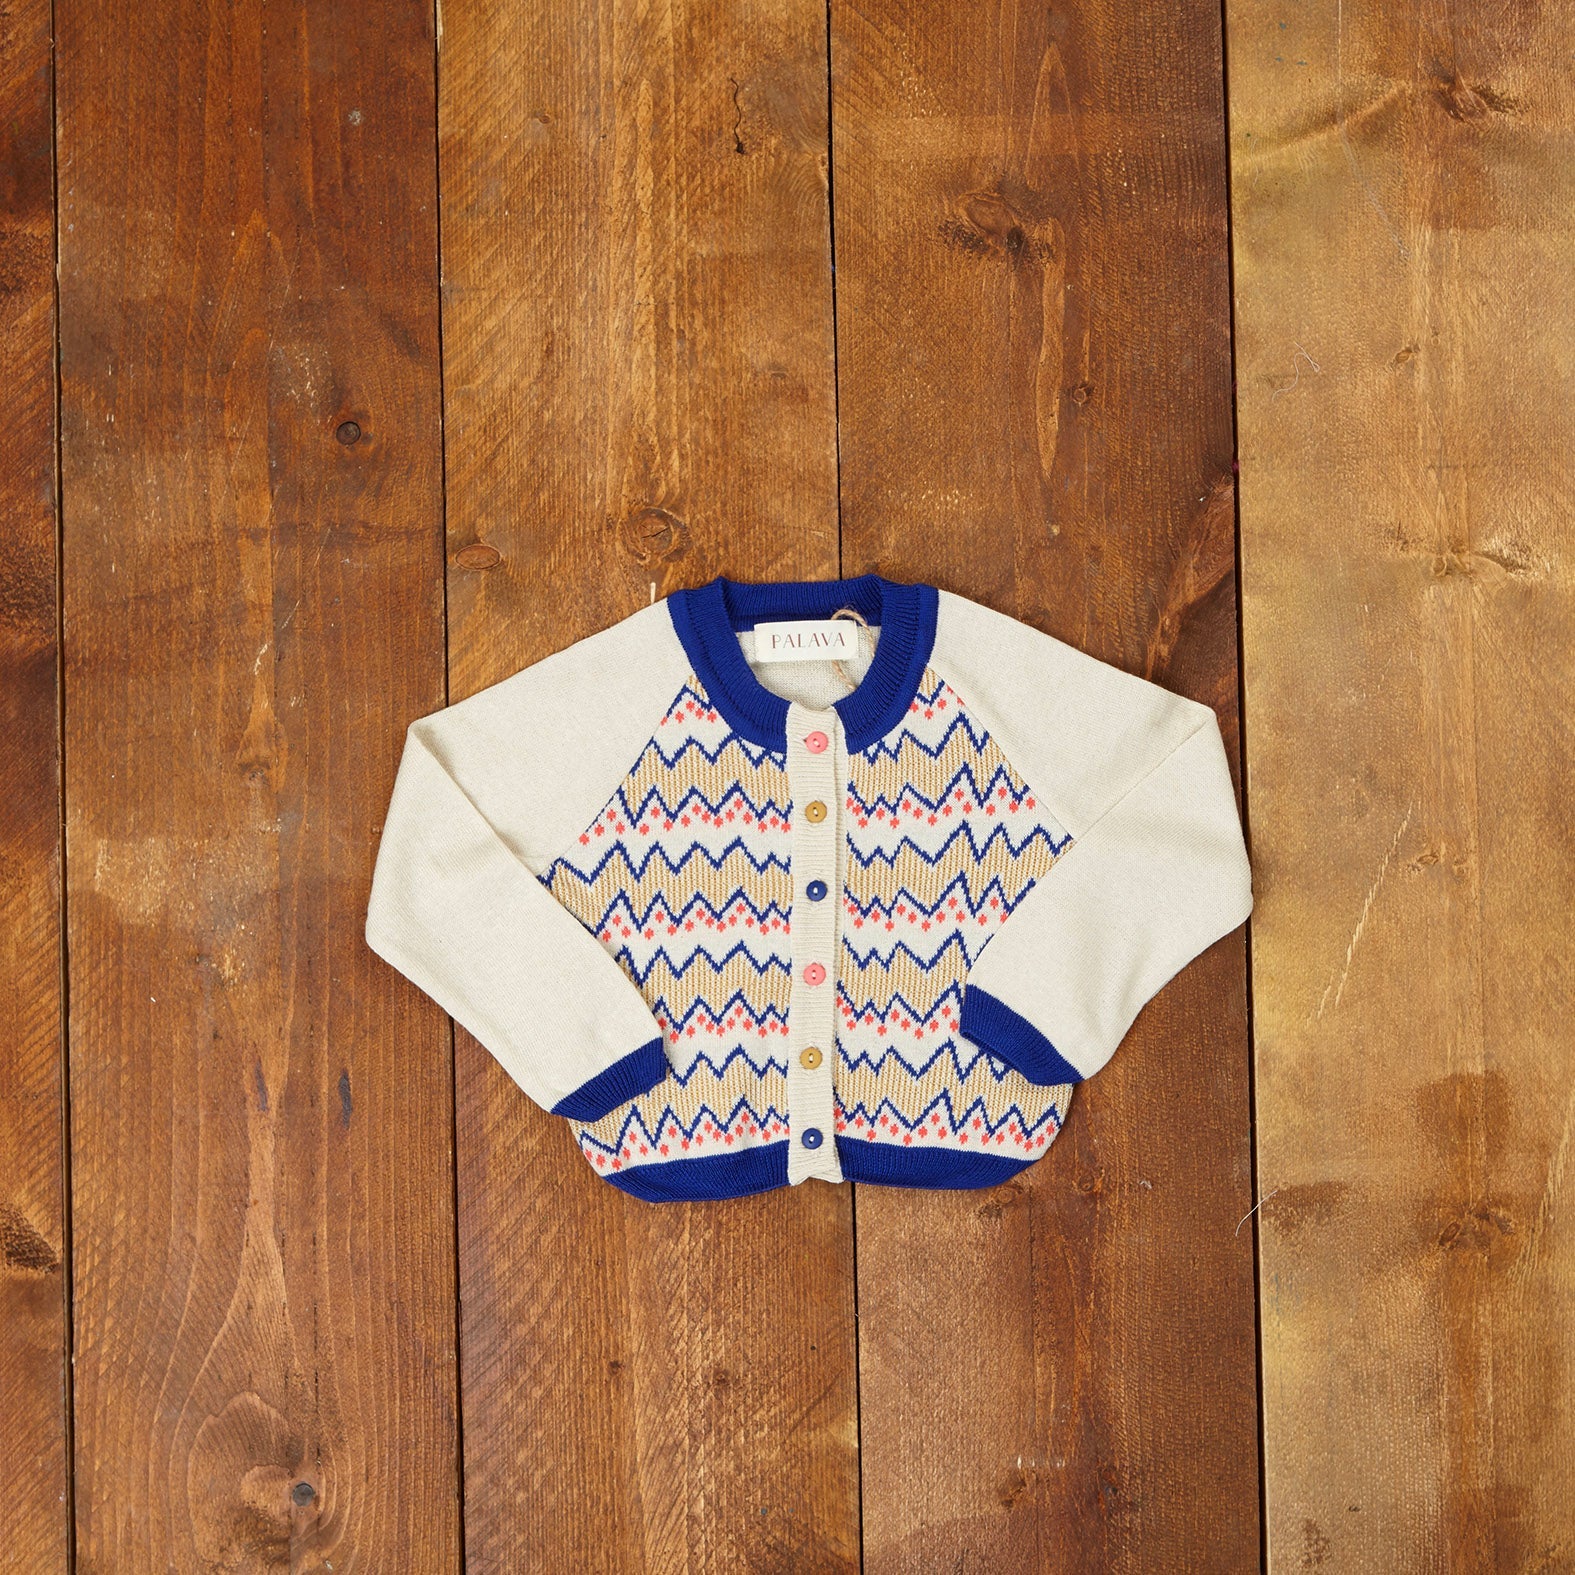 Palava_Childrens_Knitwear_Cream_Zig_Zag_Christmas_Gift_Cardigan_Cotton_Ethically_Made_Vintage_Style_Party.jpg